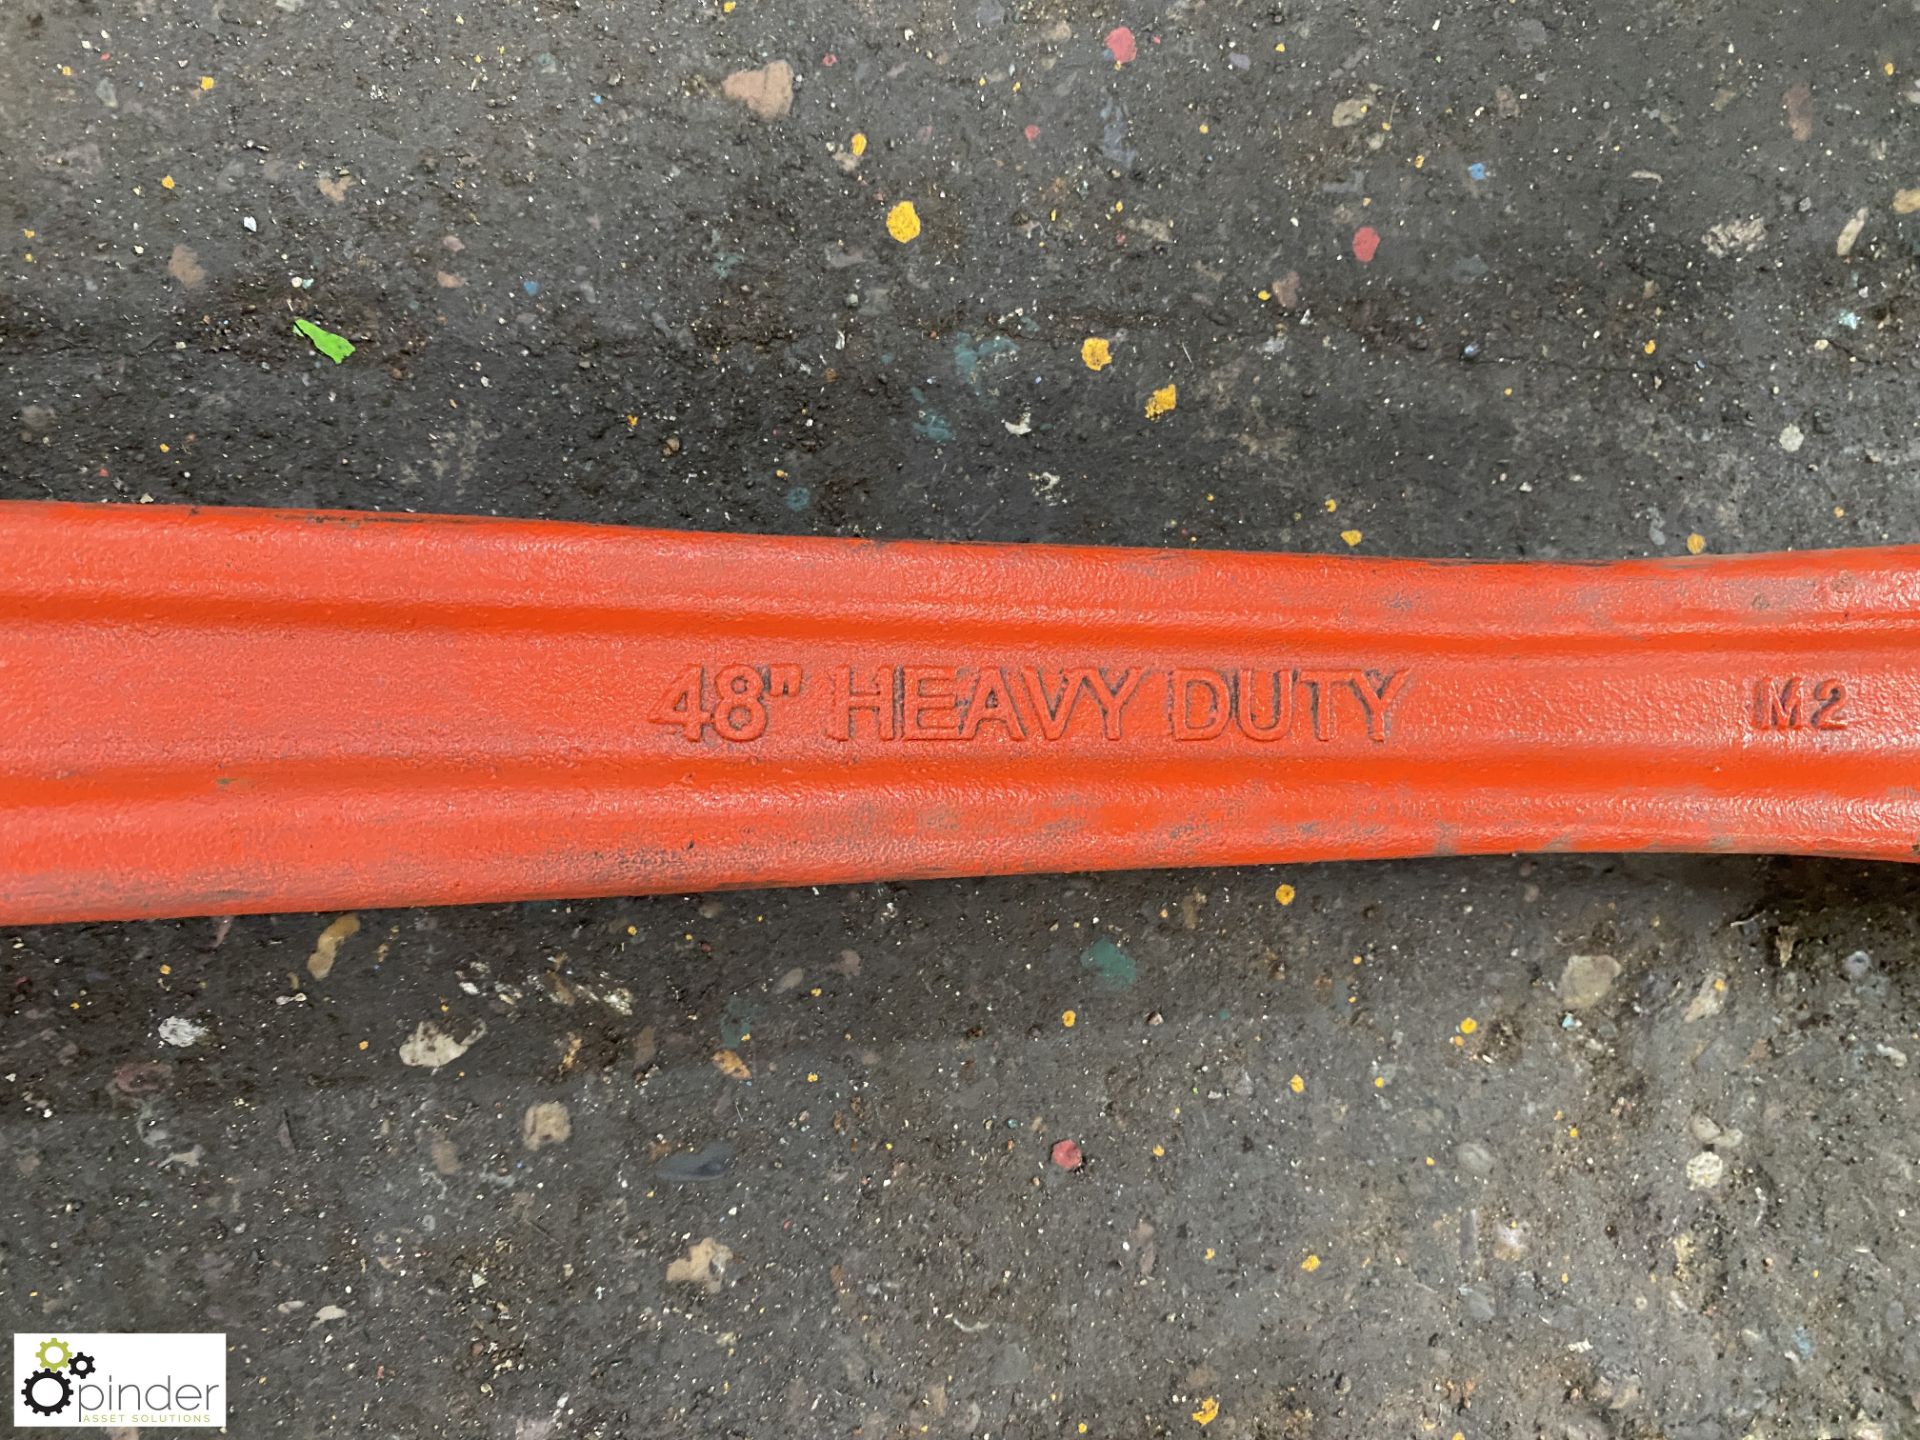 Ridgid heavy duty Pipe Wrench, 48in - Image 2 of 4